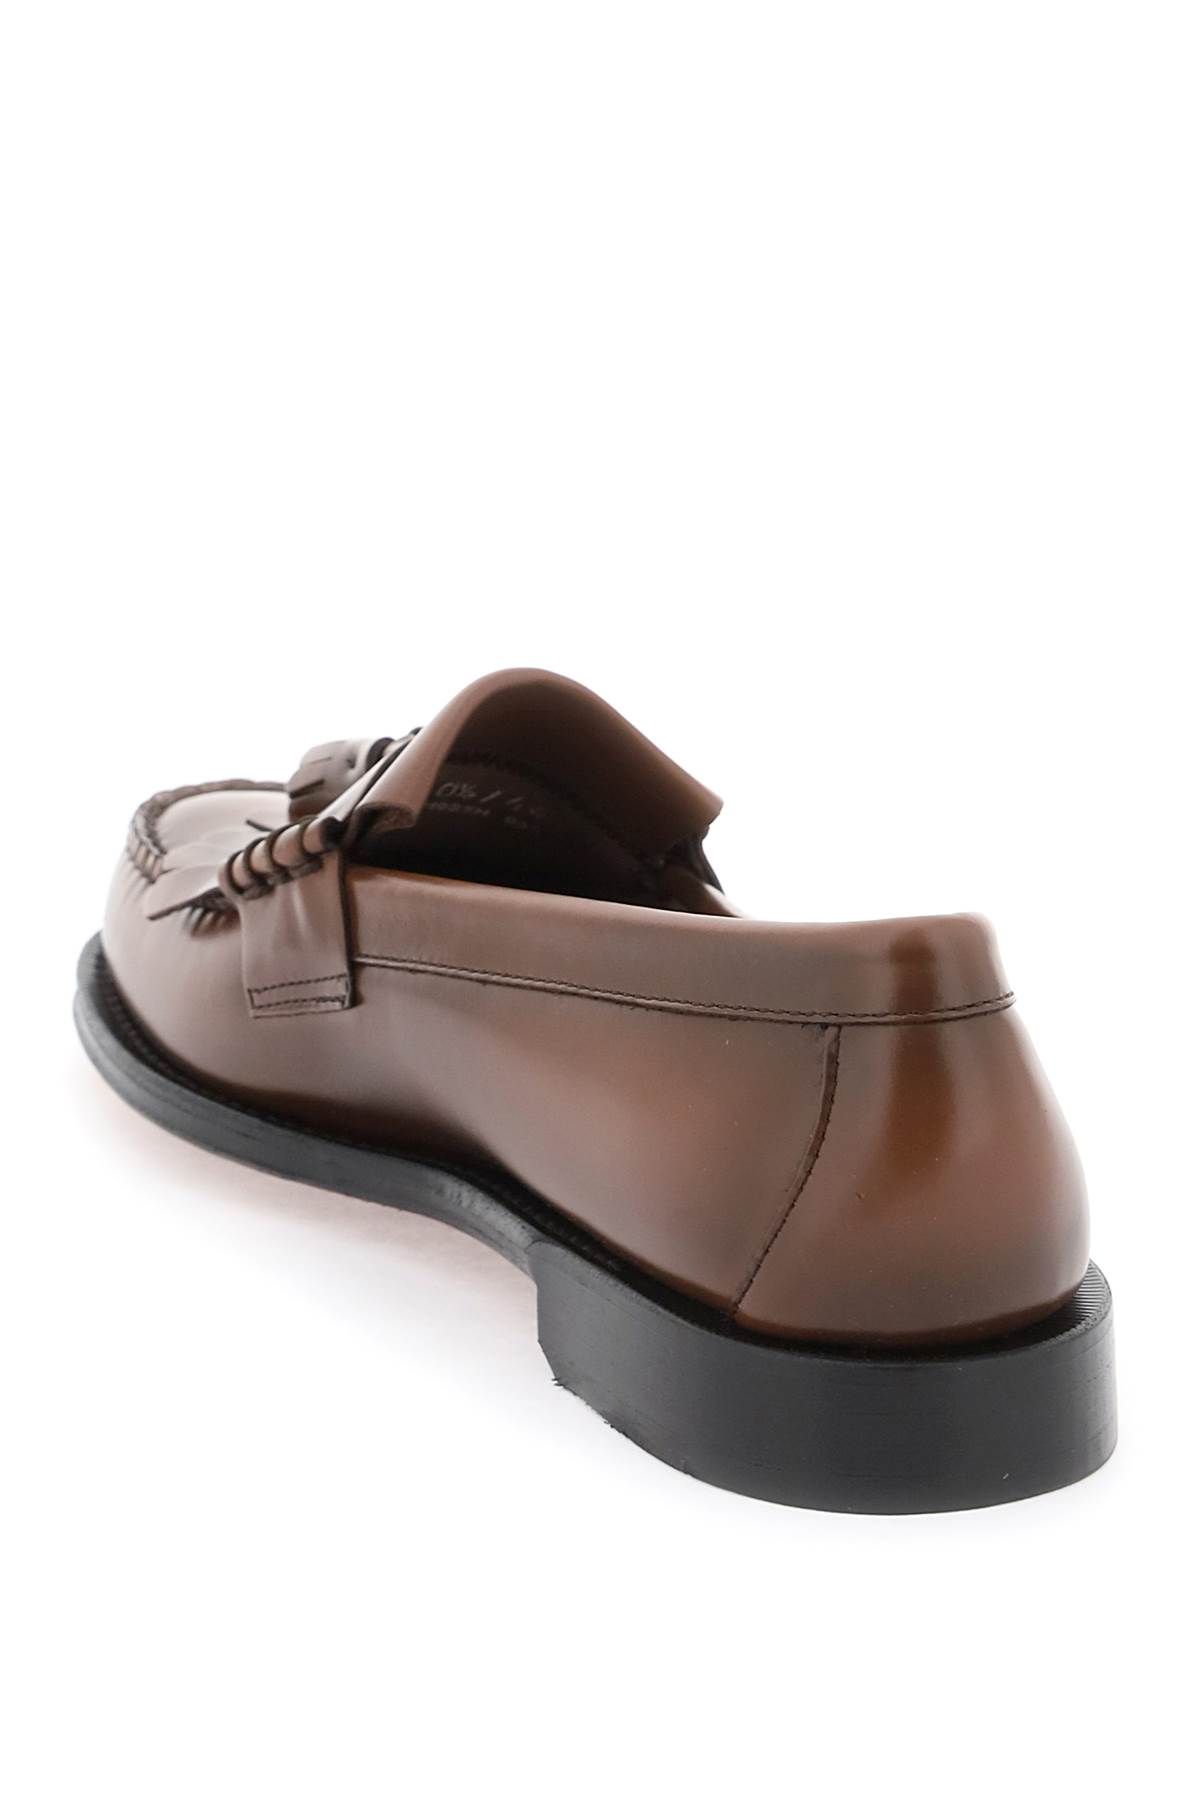 Shop Gh Bass Esther Kiltie Weejuns Loafers In Brown